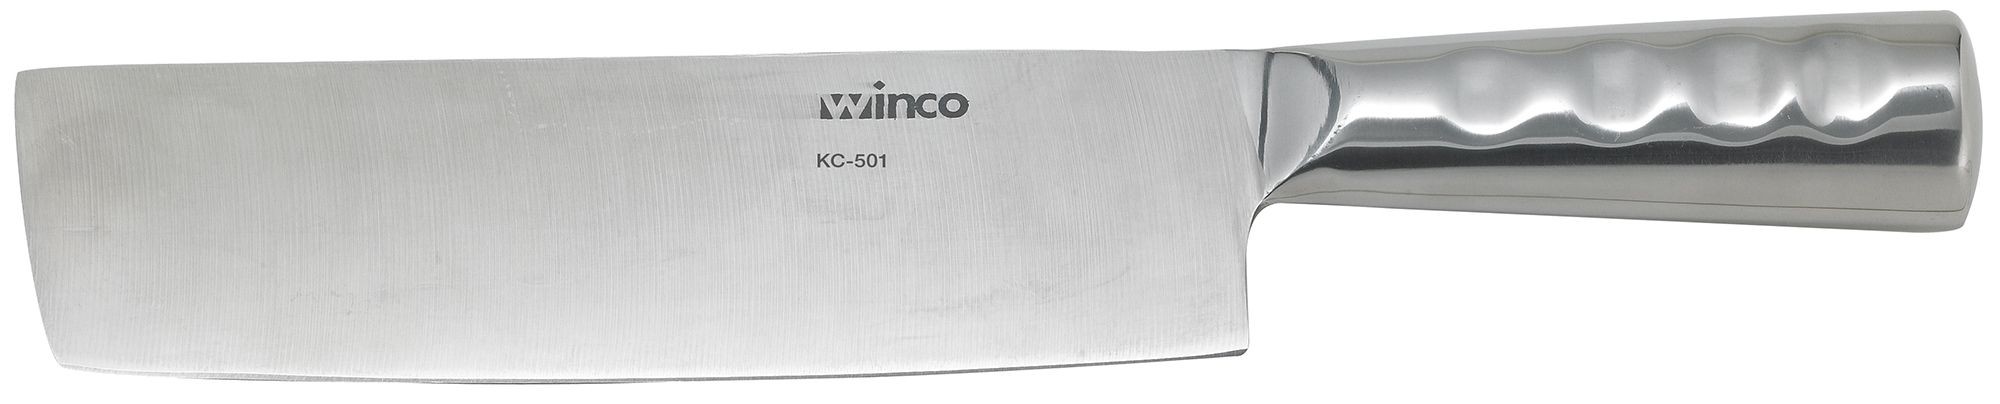 Winco KC-501 Chinese Cleaver with Steel Handle, 8" x 2-1/4" Blade